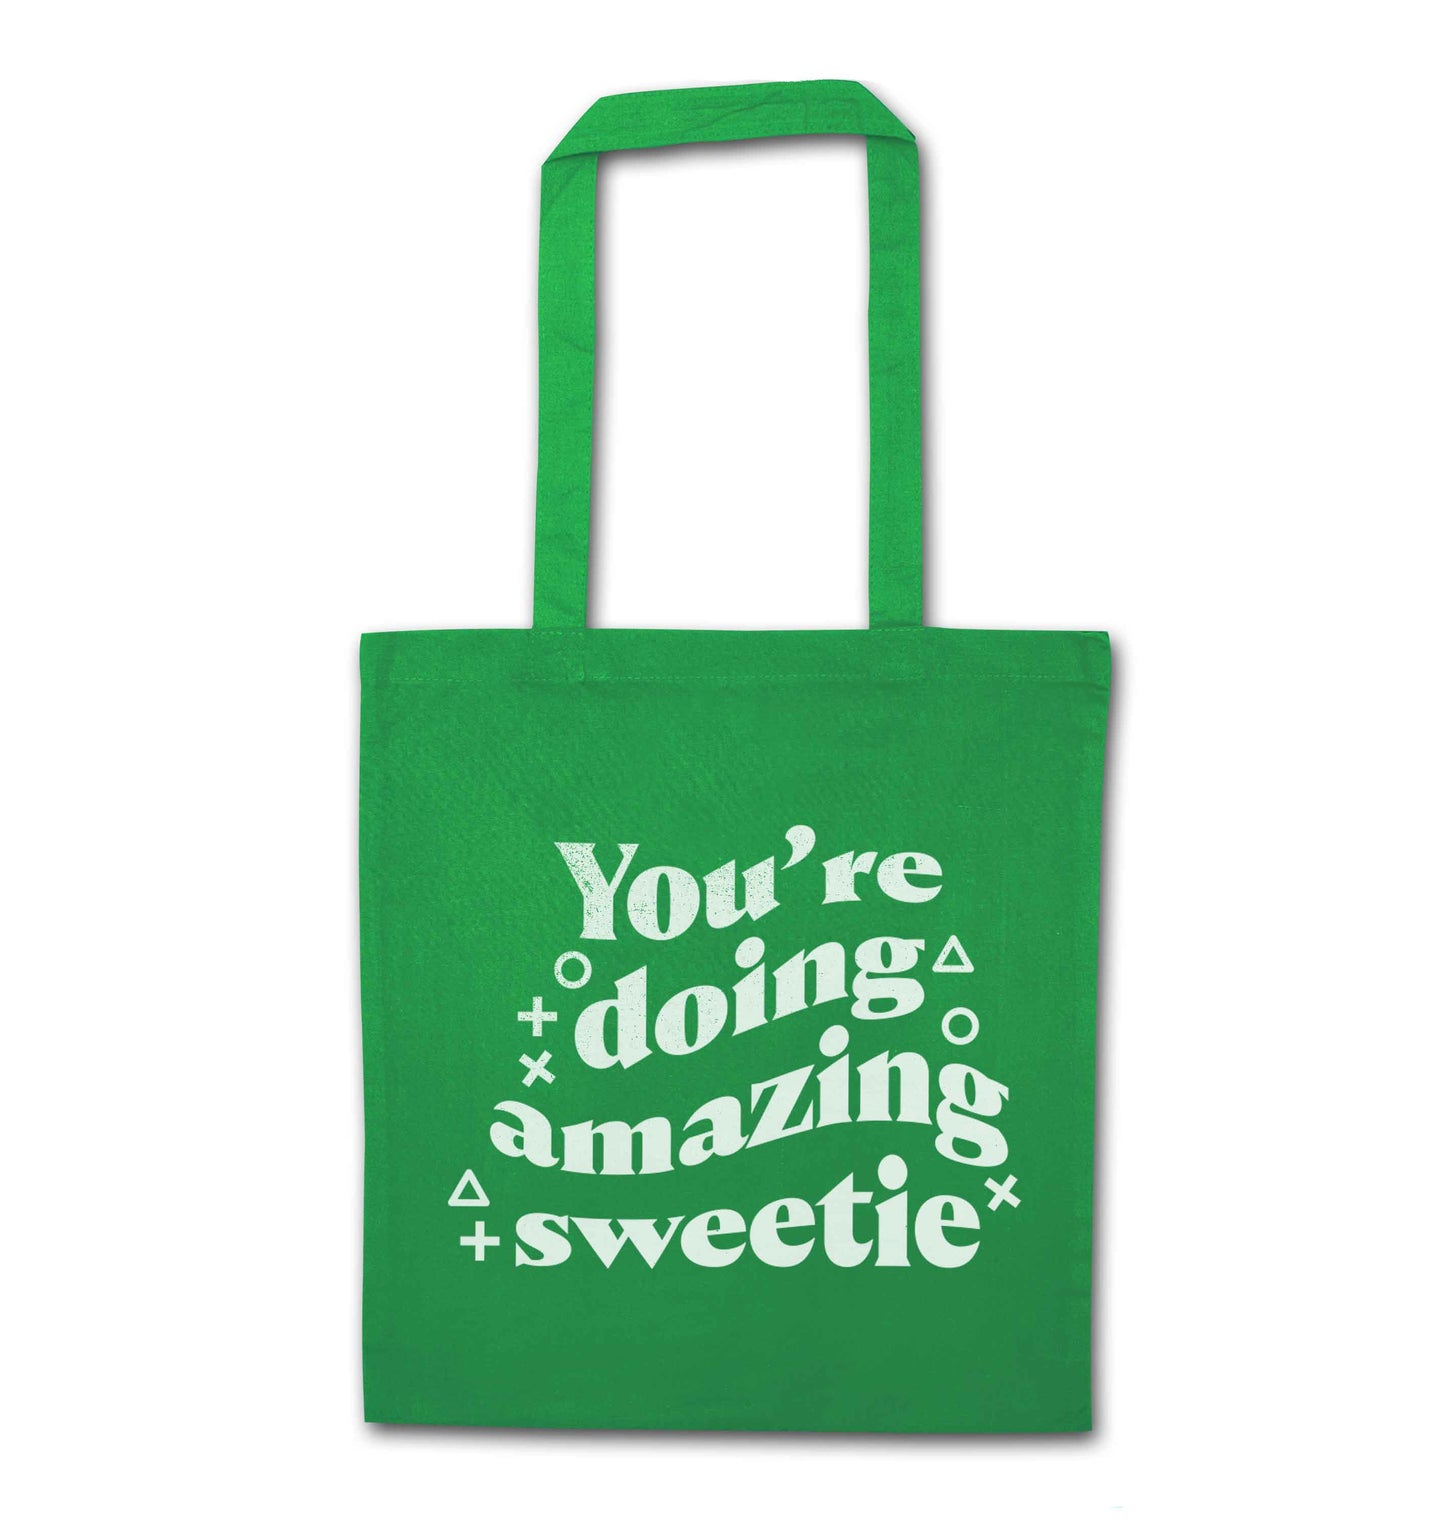 You're doing amazing sweetie green tote bag